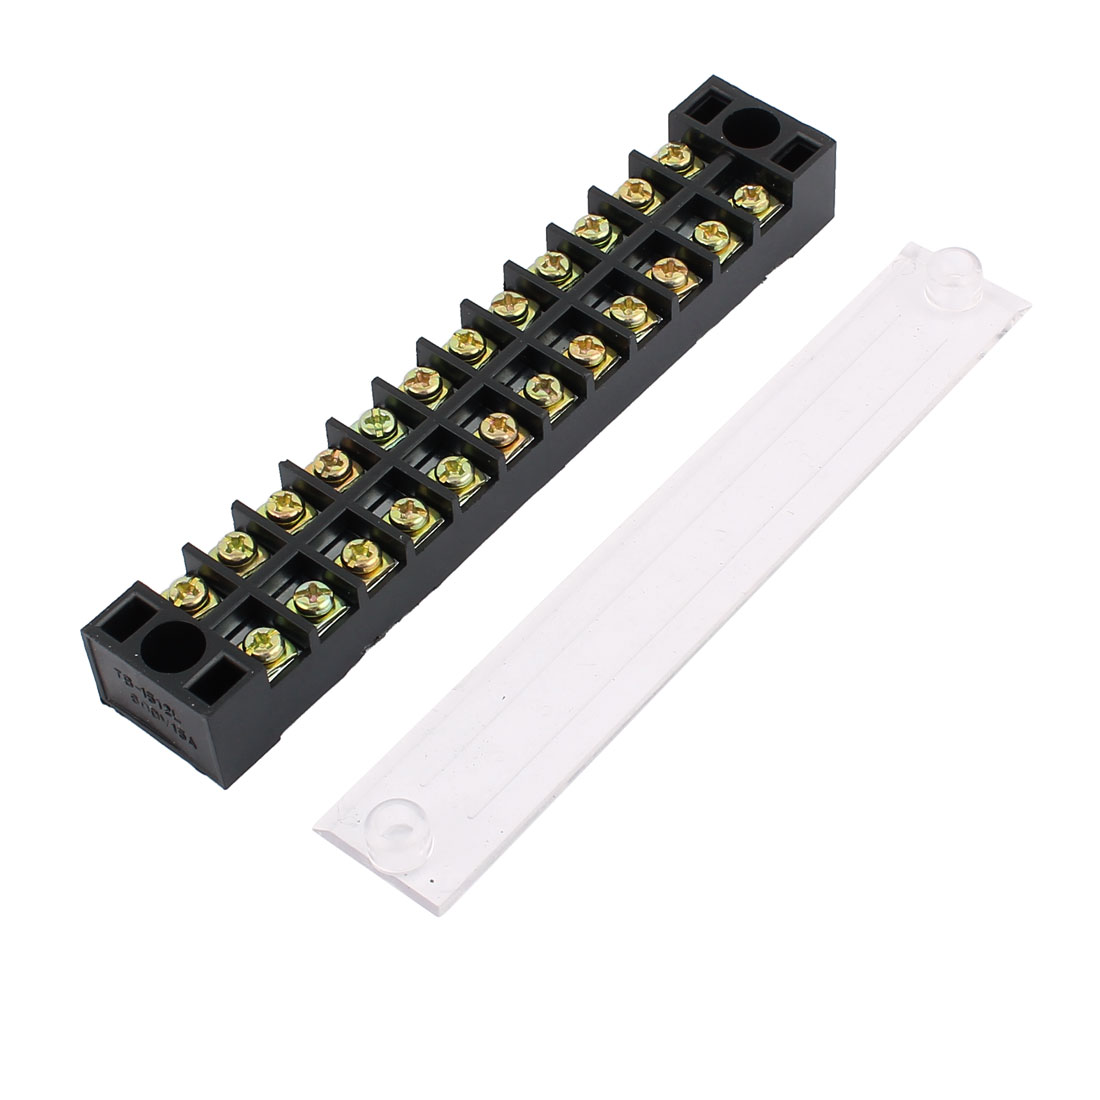 10 Pcs 600V 15A 12P Screw Electrical Barrier Terminal Block Cable Connector Bar - image 3 of 5